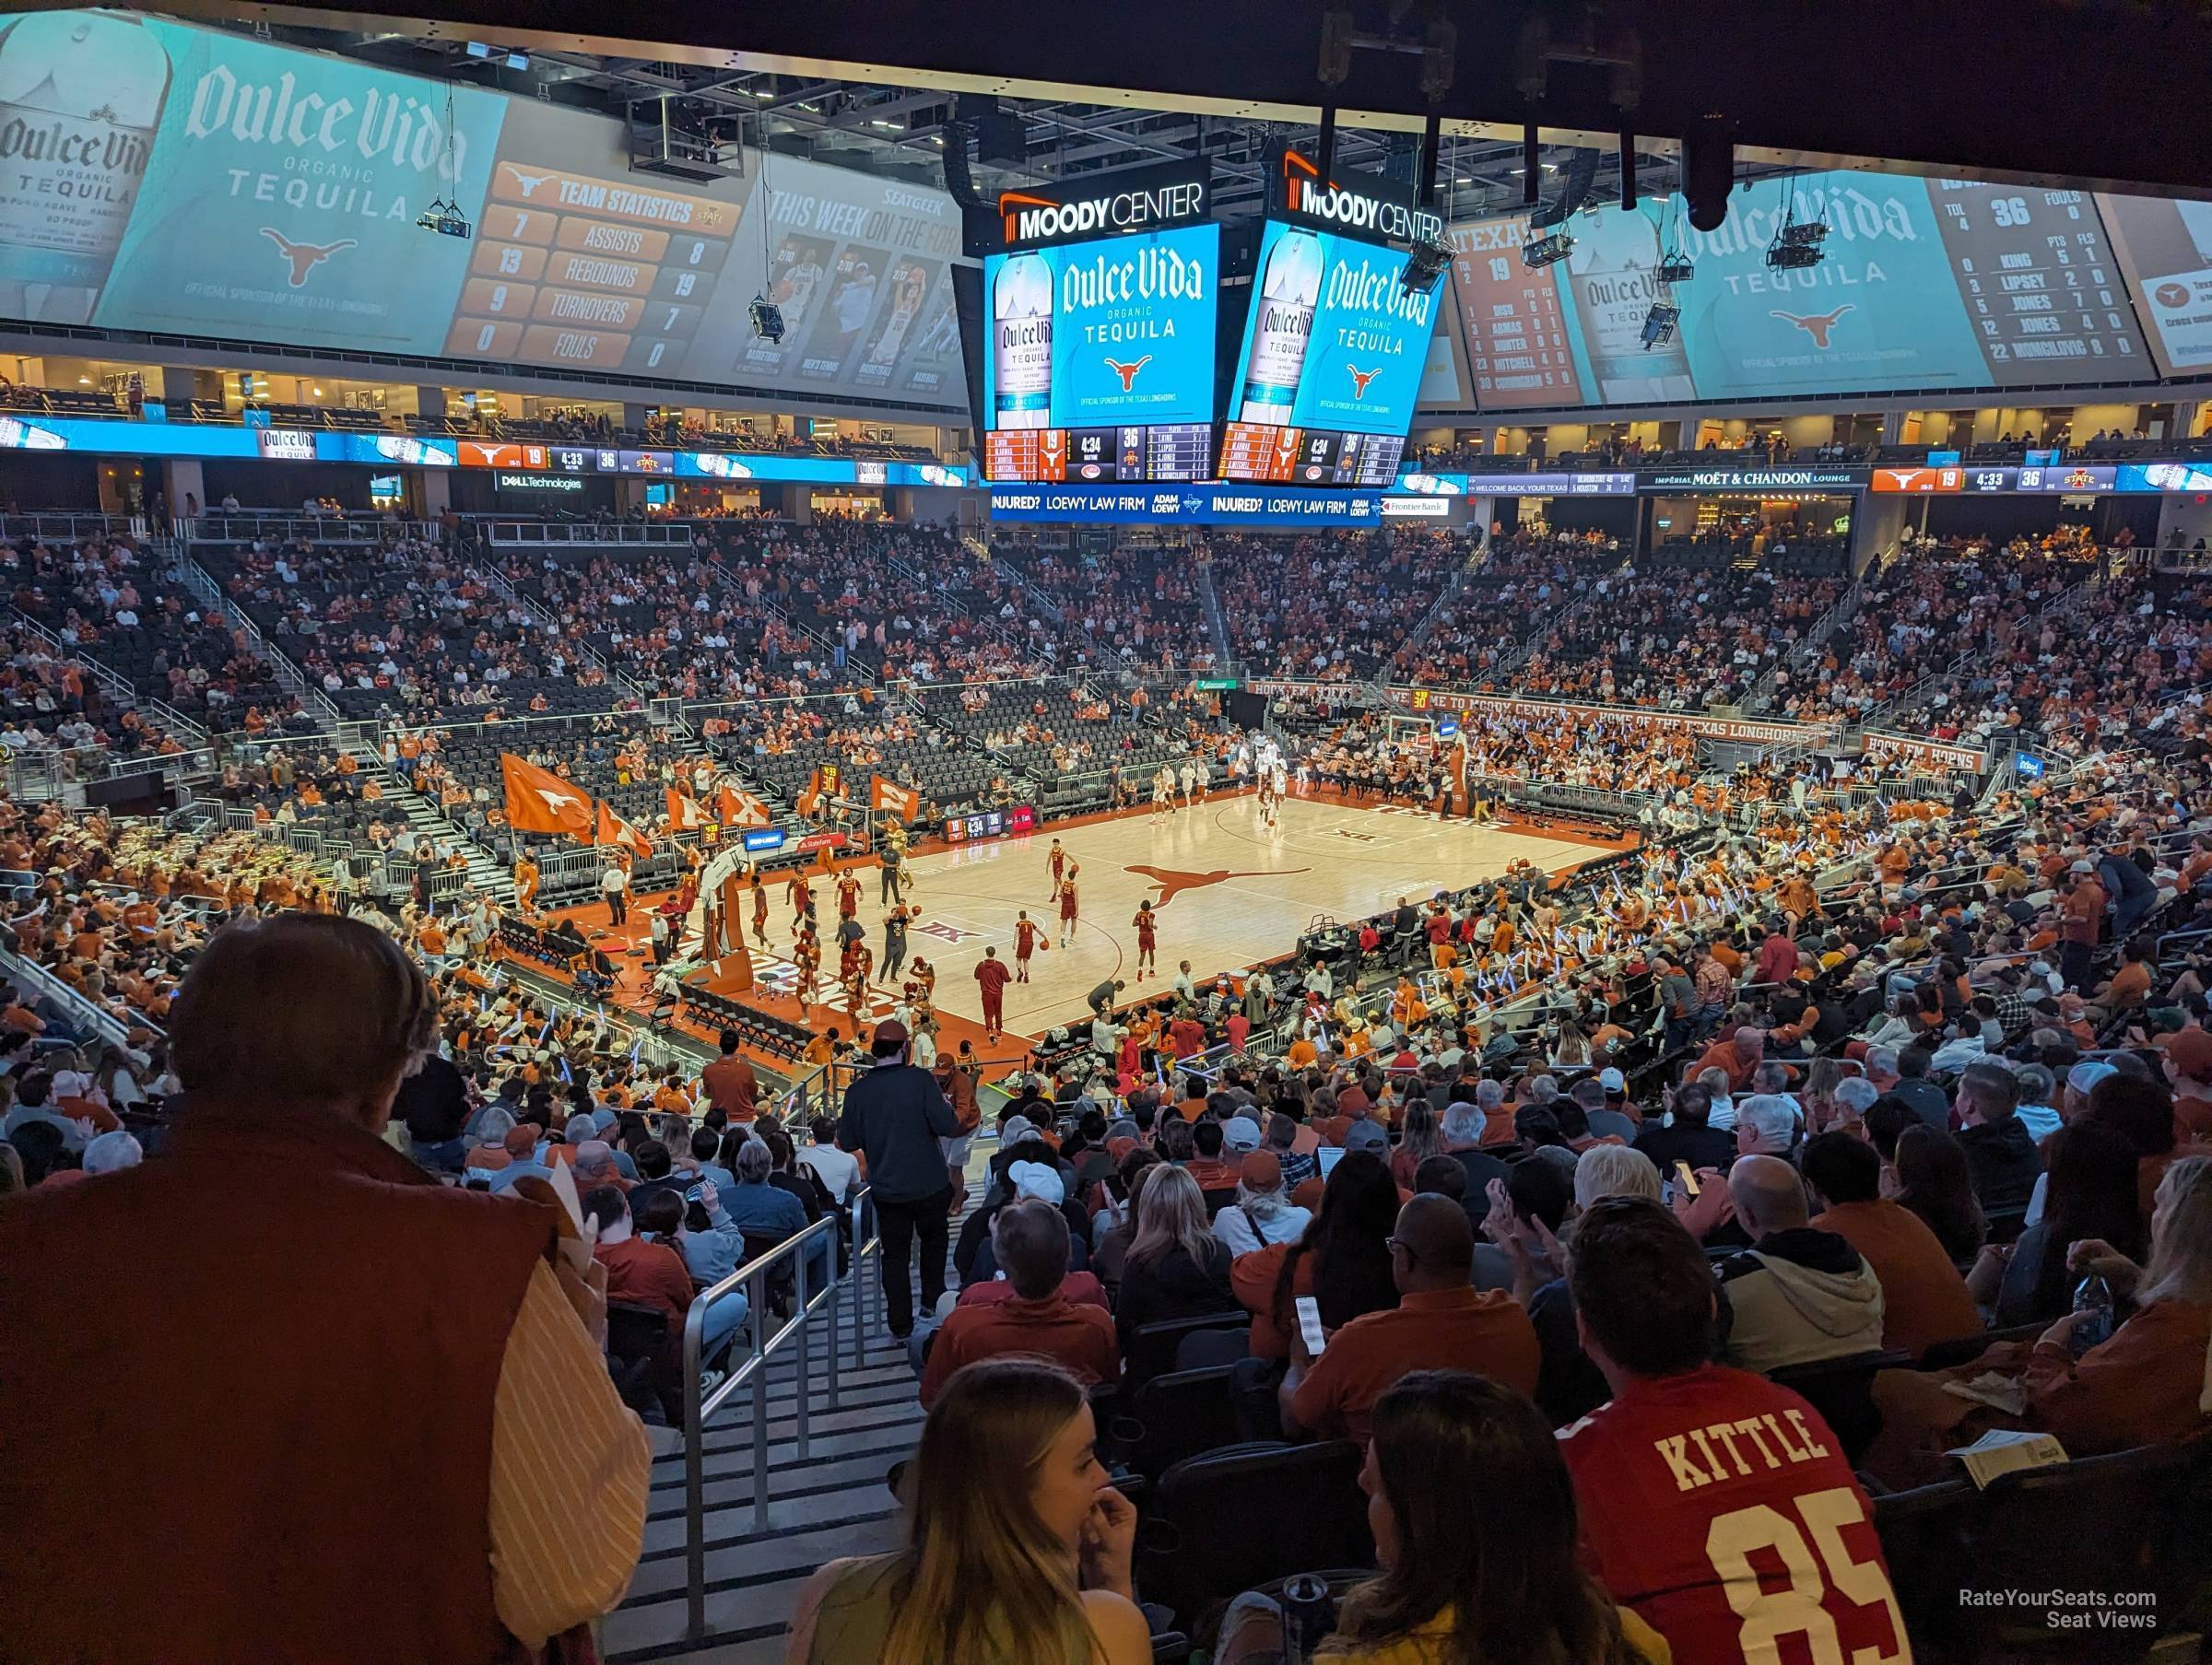 section 122 seat view  for basketball - moody center atx